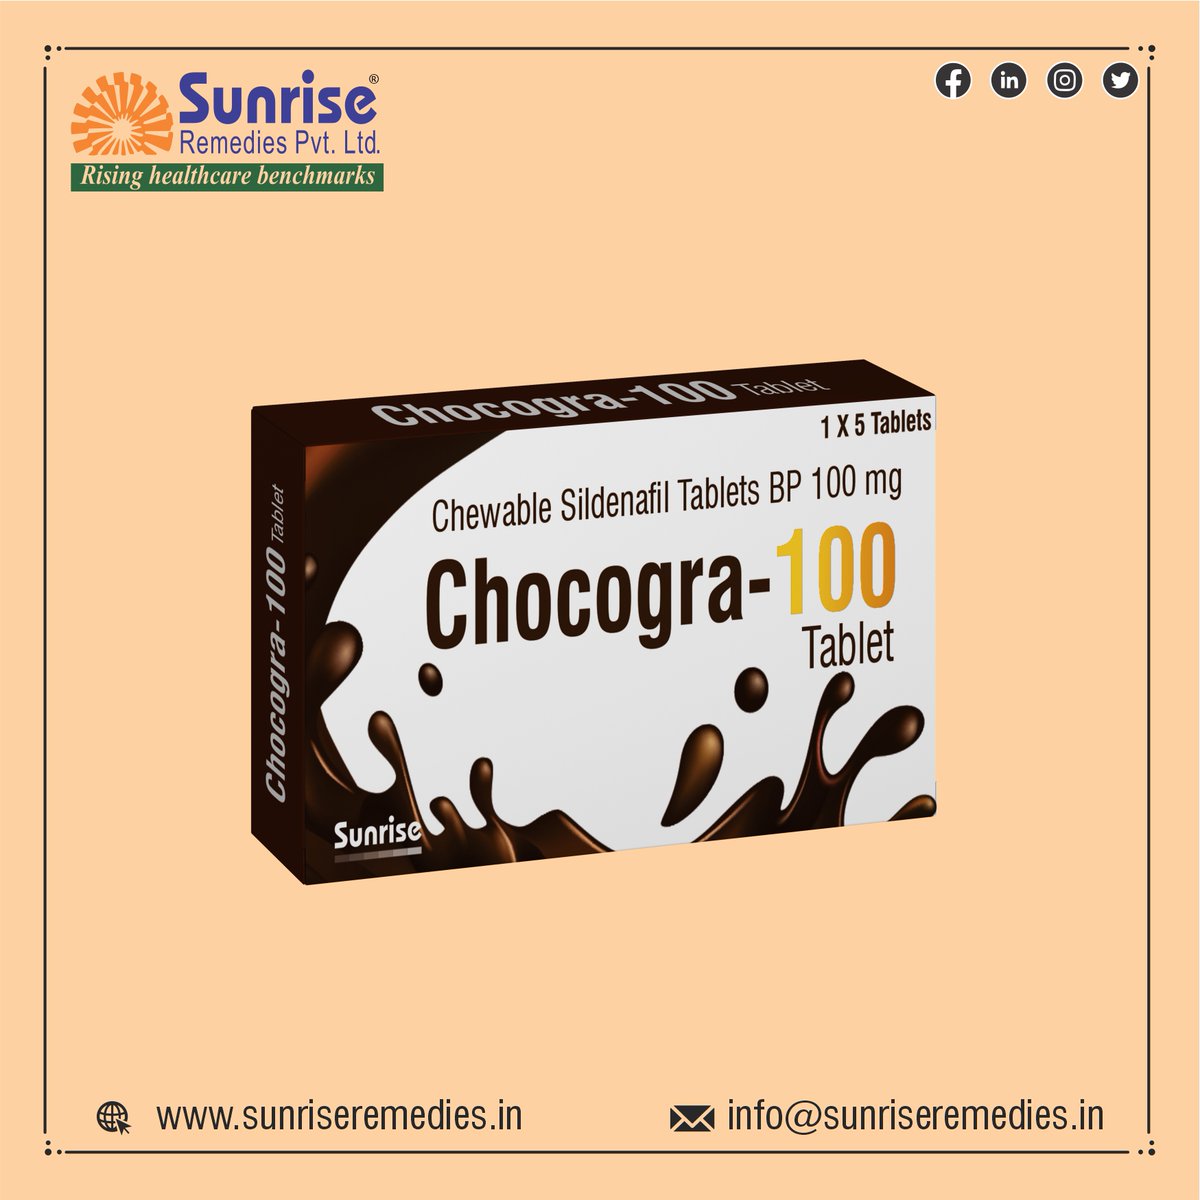 Make Your Love Marking Life Happier with Chocogra Chewable Contains #SildenafilChewable Most Popular Products From Sunrise Remedies Pvt. Ltd.  

Read More: sunriseremedies.in/our-products/c…

#SildenafilChewable #TadalafilChewable #Dapoxetine #Vardenafil #Avanafil #Udenafil #SildenafilJelly